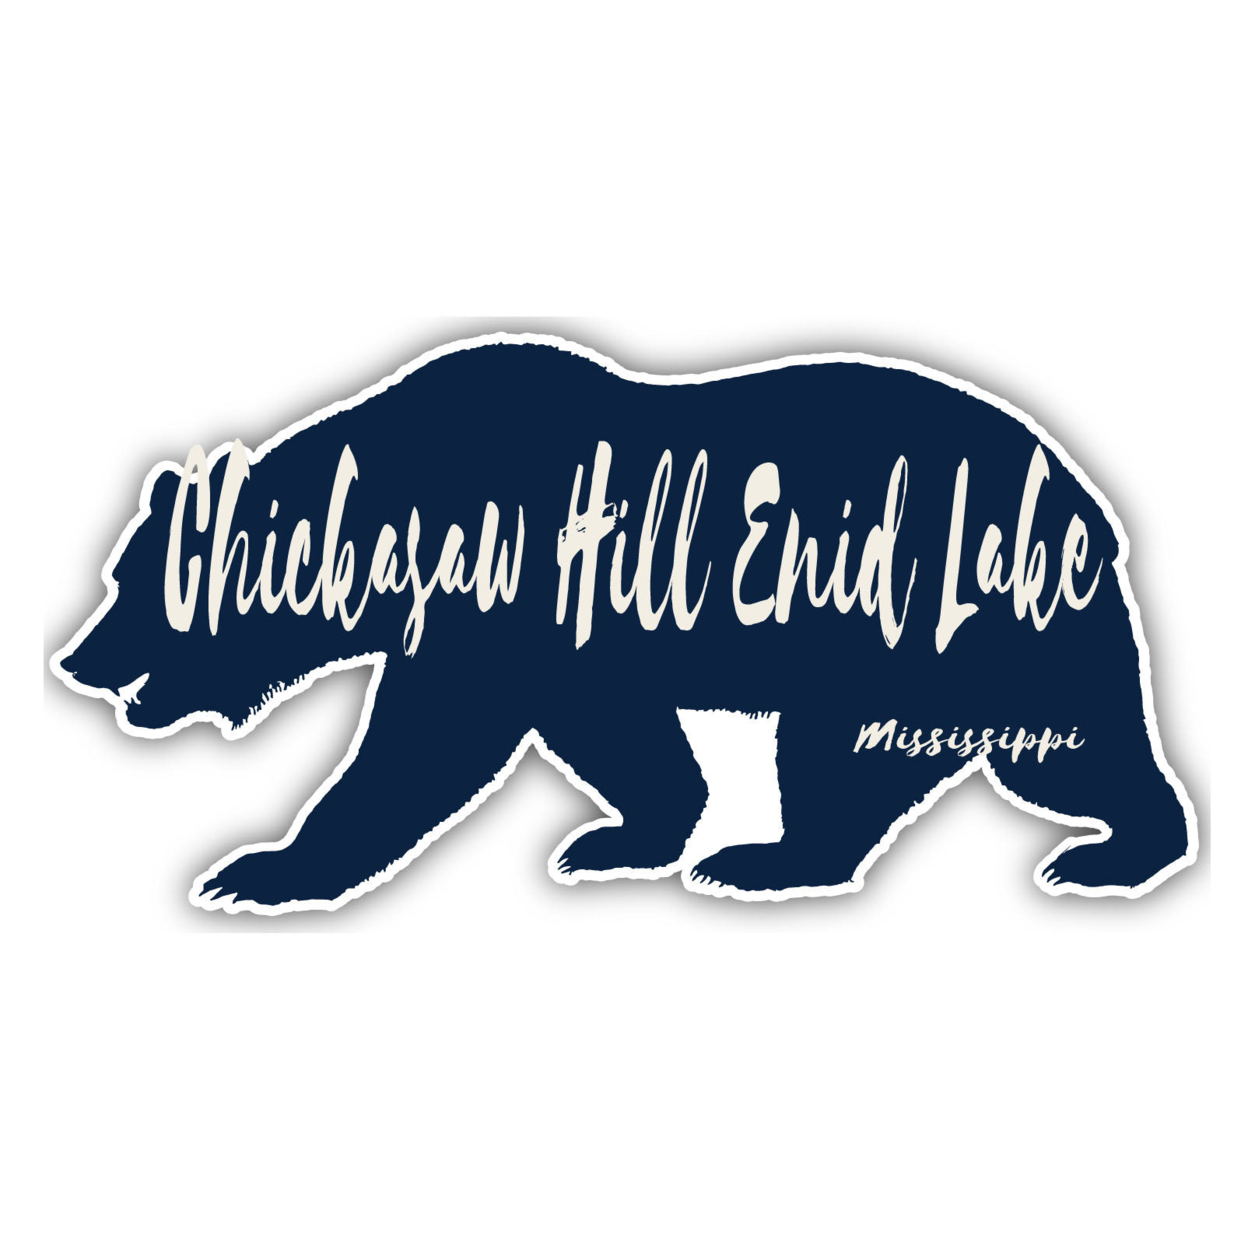 Chickasaw Hill Enid Lake Mississippi Souvenir Decorative Stickers (Choose Theme And Size) - Single Unit, 6-Inch, Bear